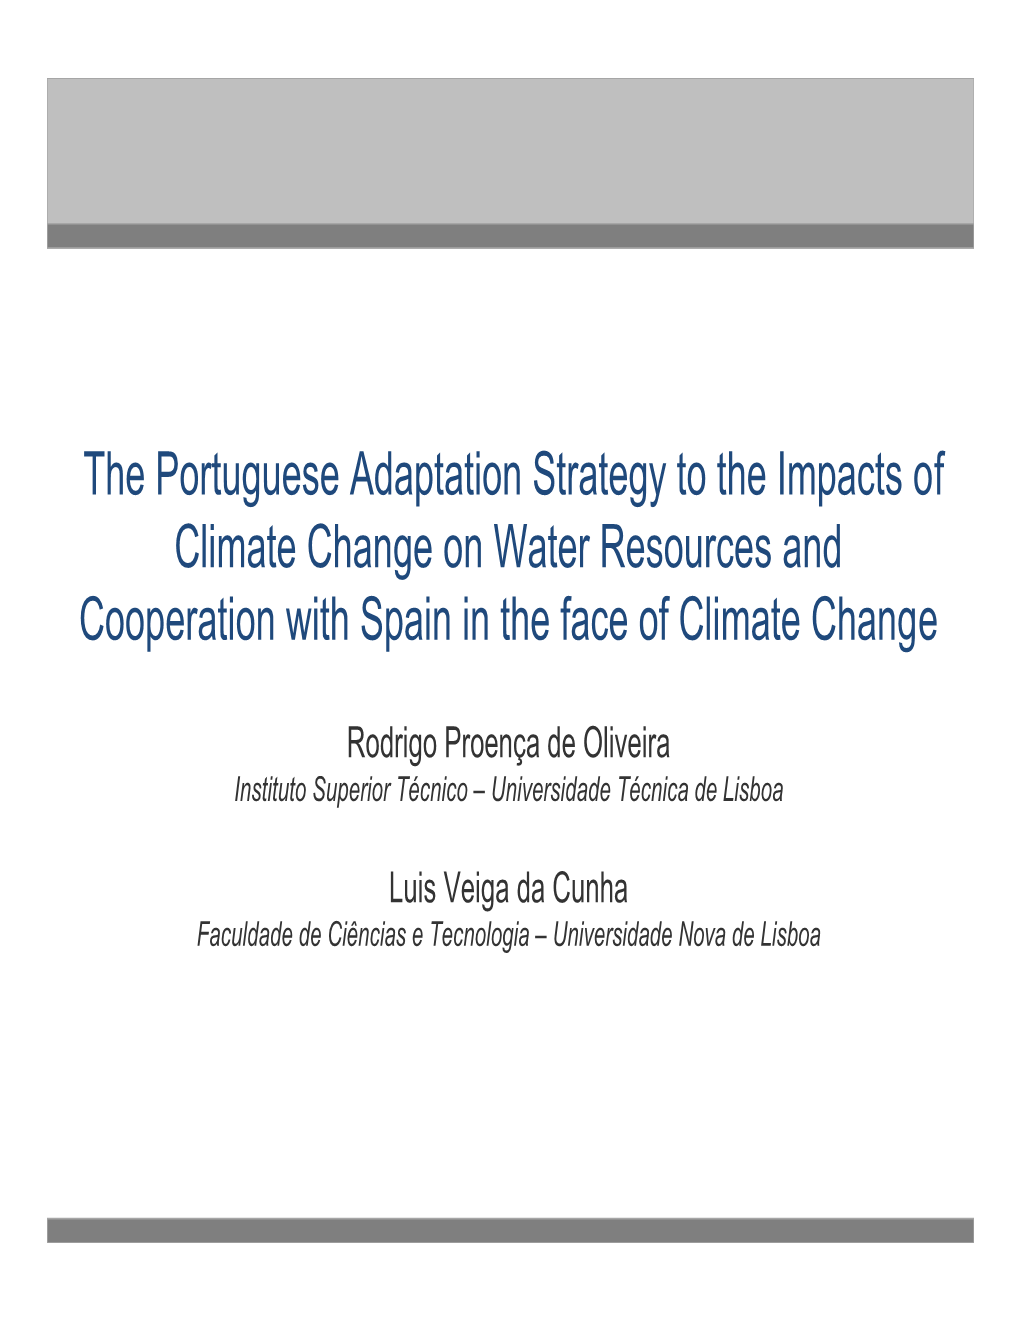 The Portuguese Adaptation Strategy to the Impacts of Climate Change on Water Resources and Cooperation with Spain in the Face of Climate Change